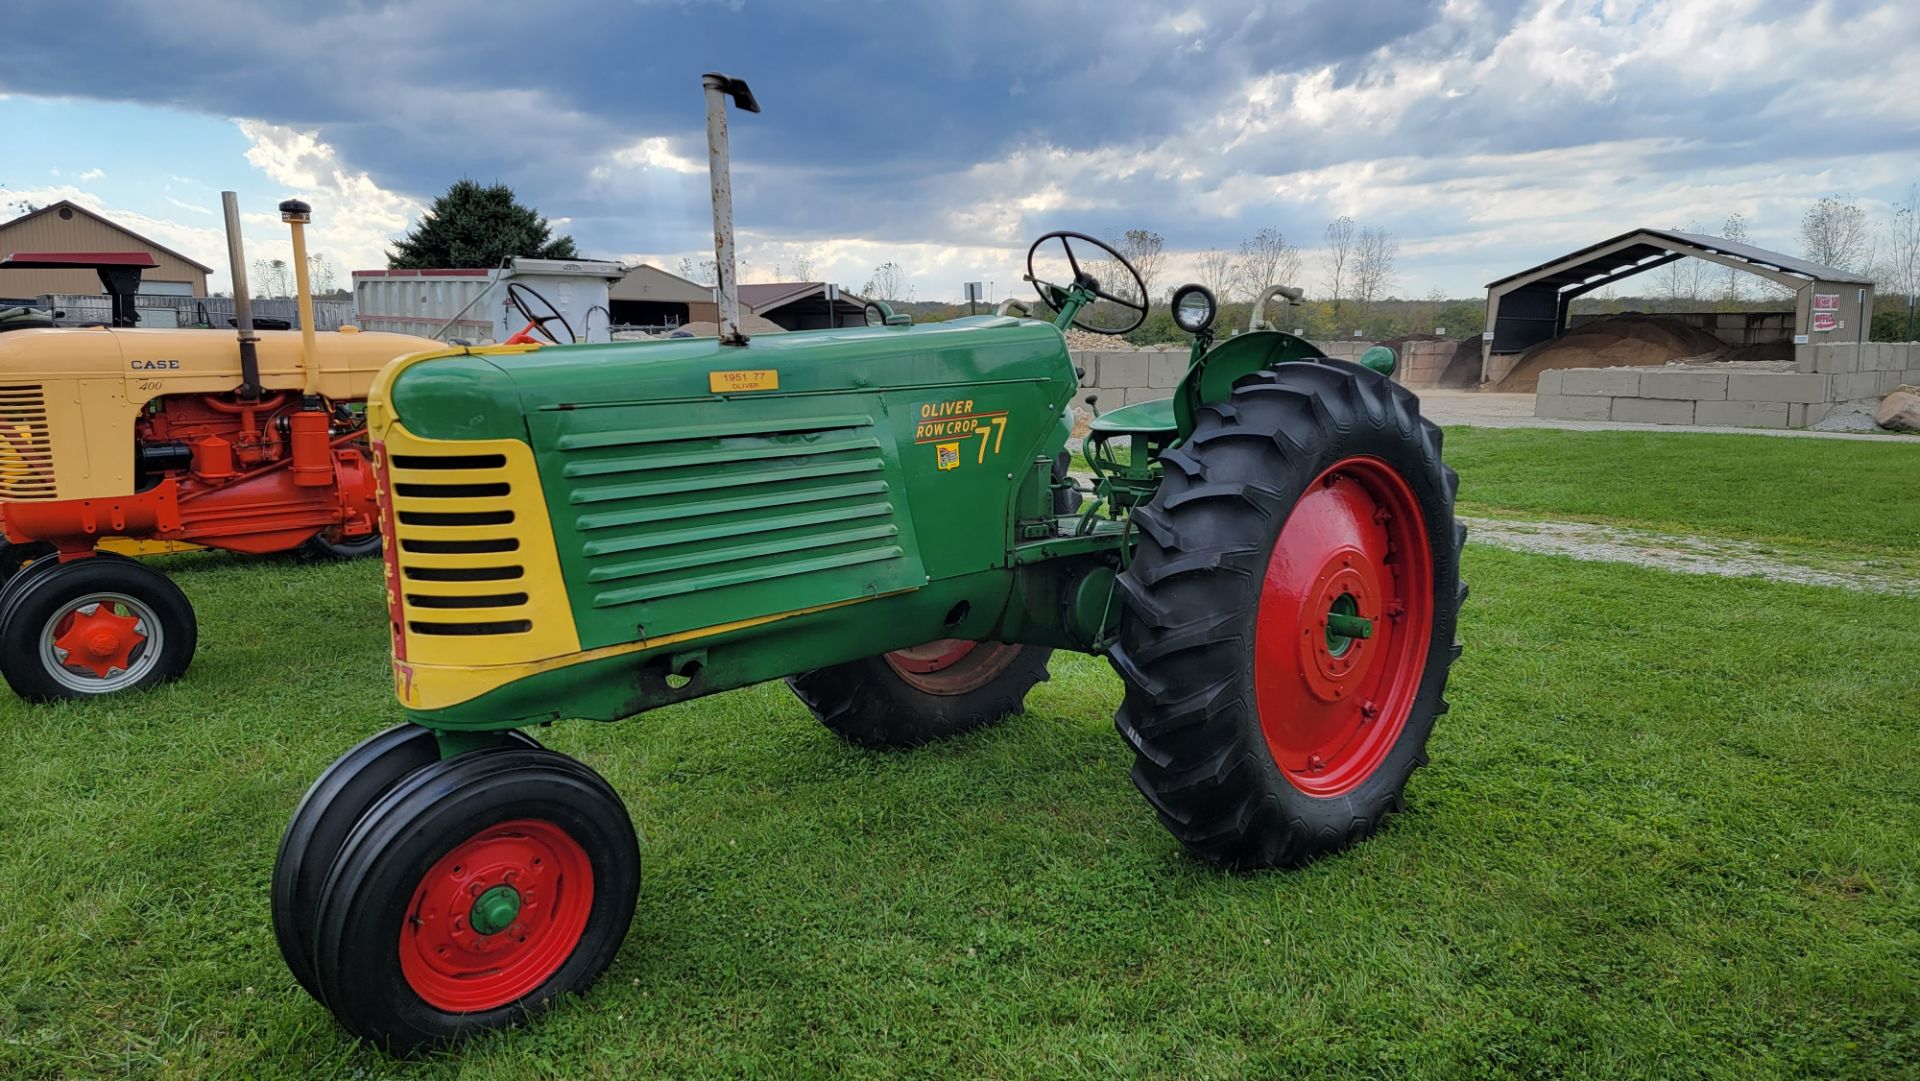 1951 Oliver 77 Row Crop Tractor, 6 Cylinder Gasoline Engine, Rear Hydraulics, Restored - Image 3 of 12